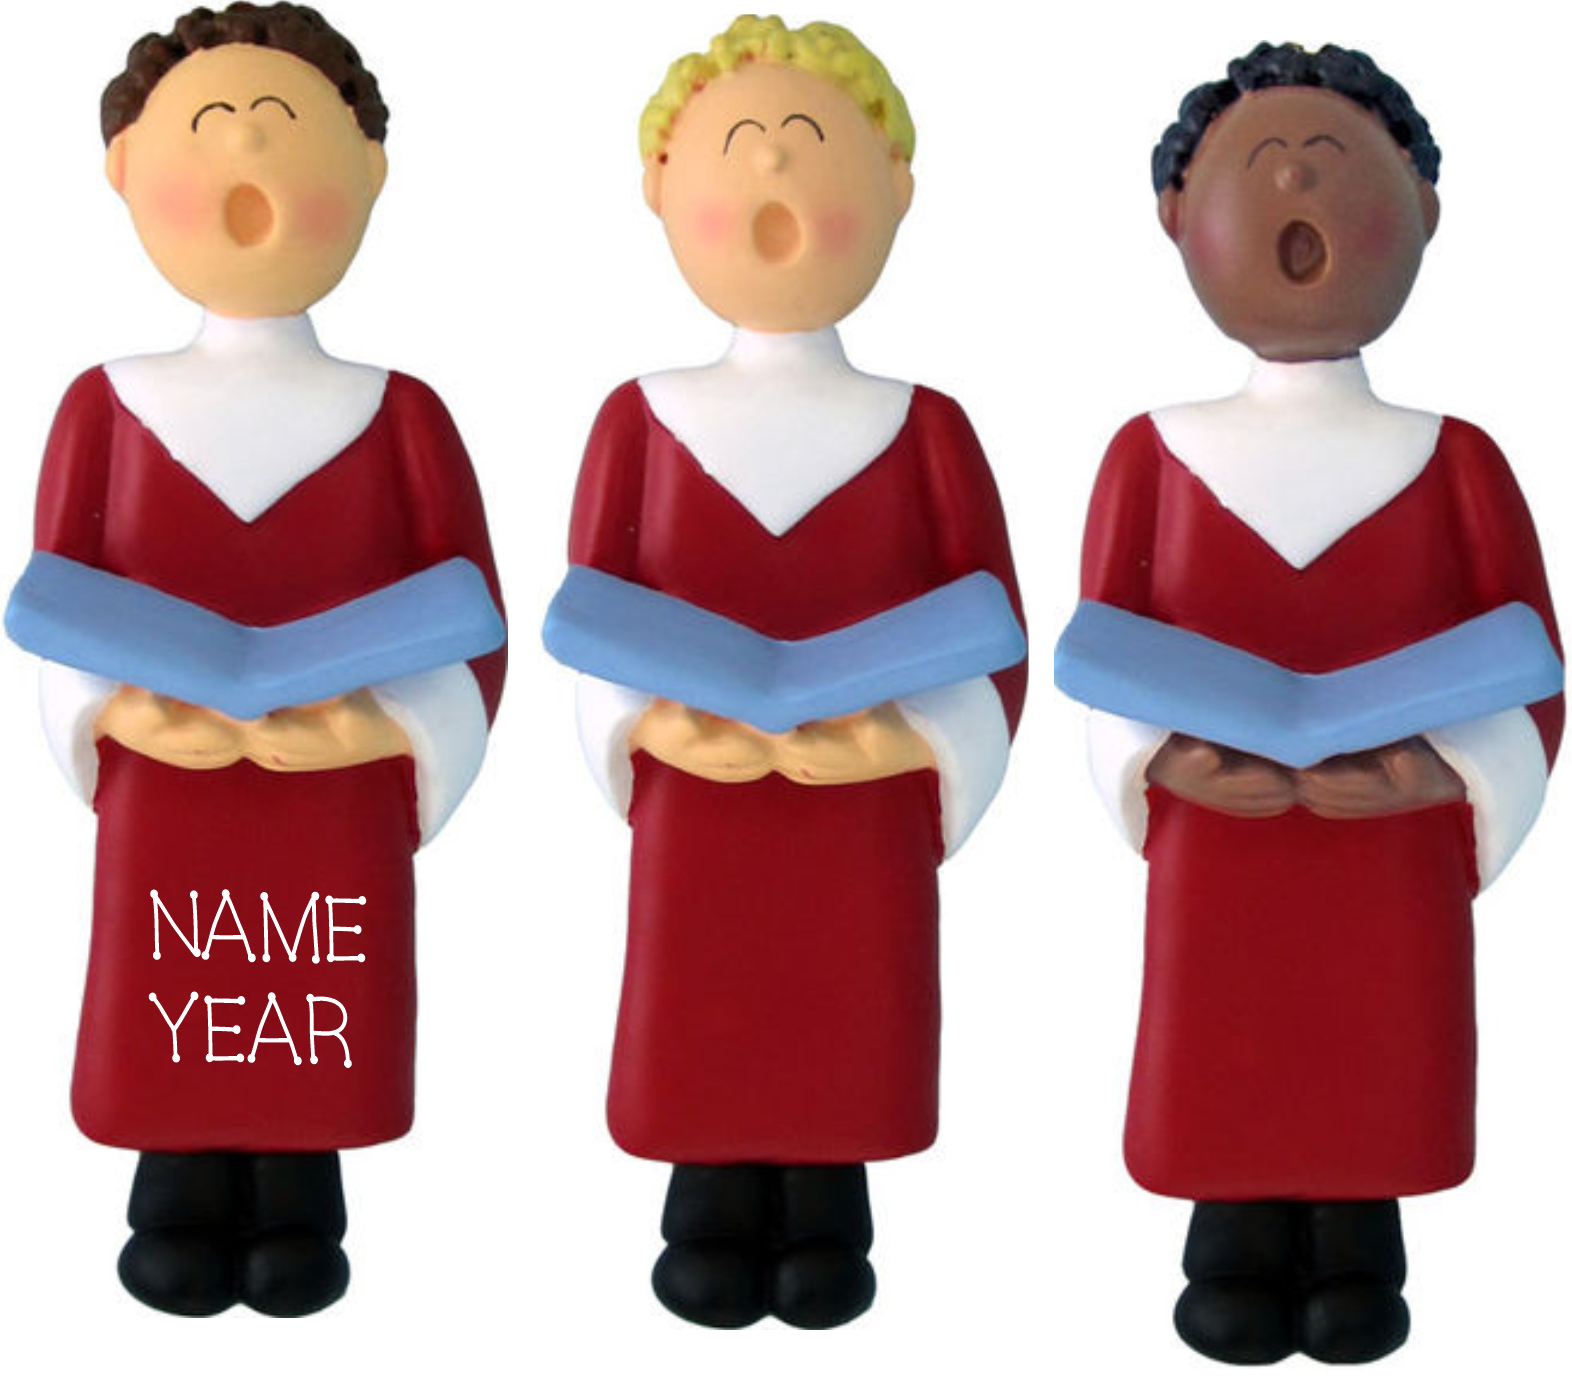 Choir Singer Male- Personalized Christmas Ornament